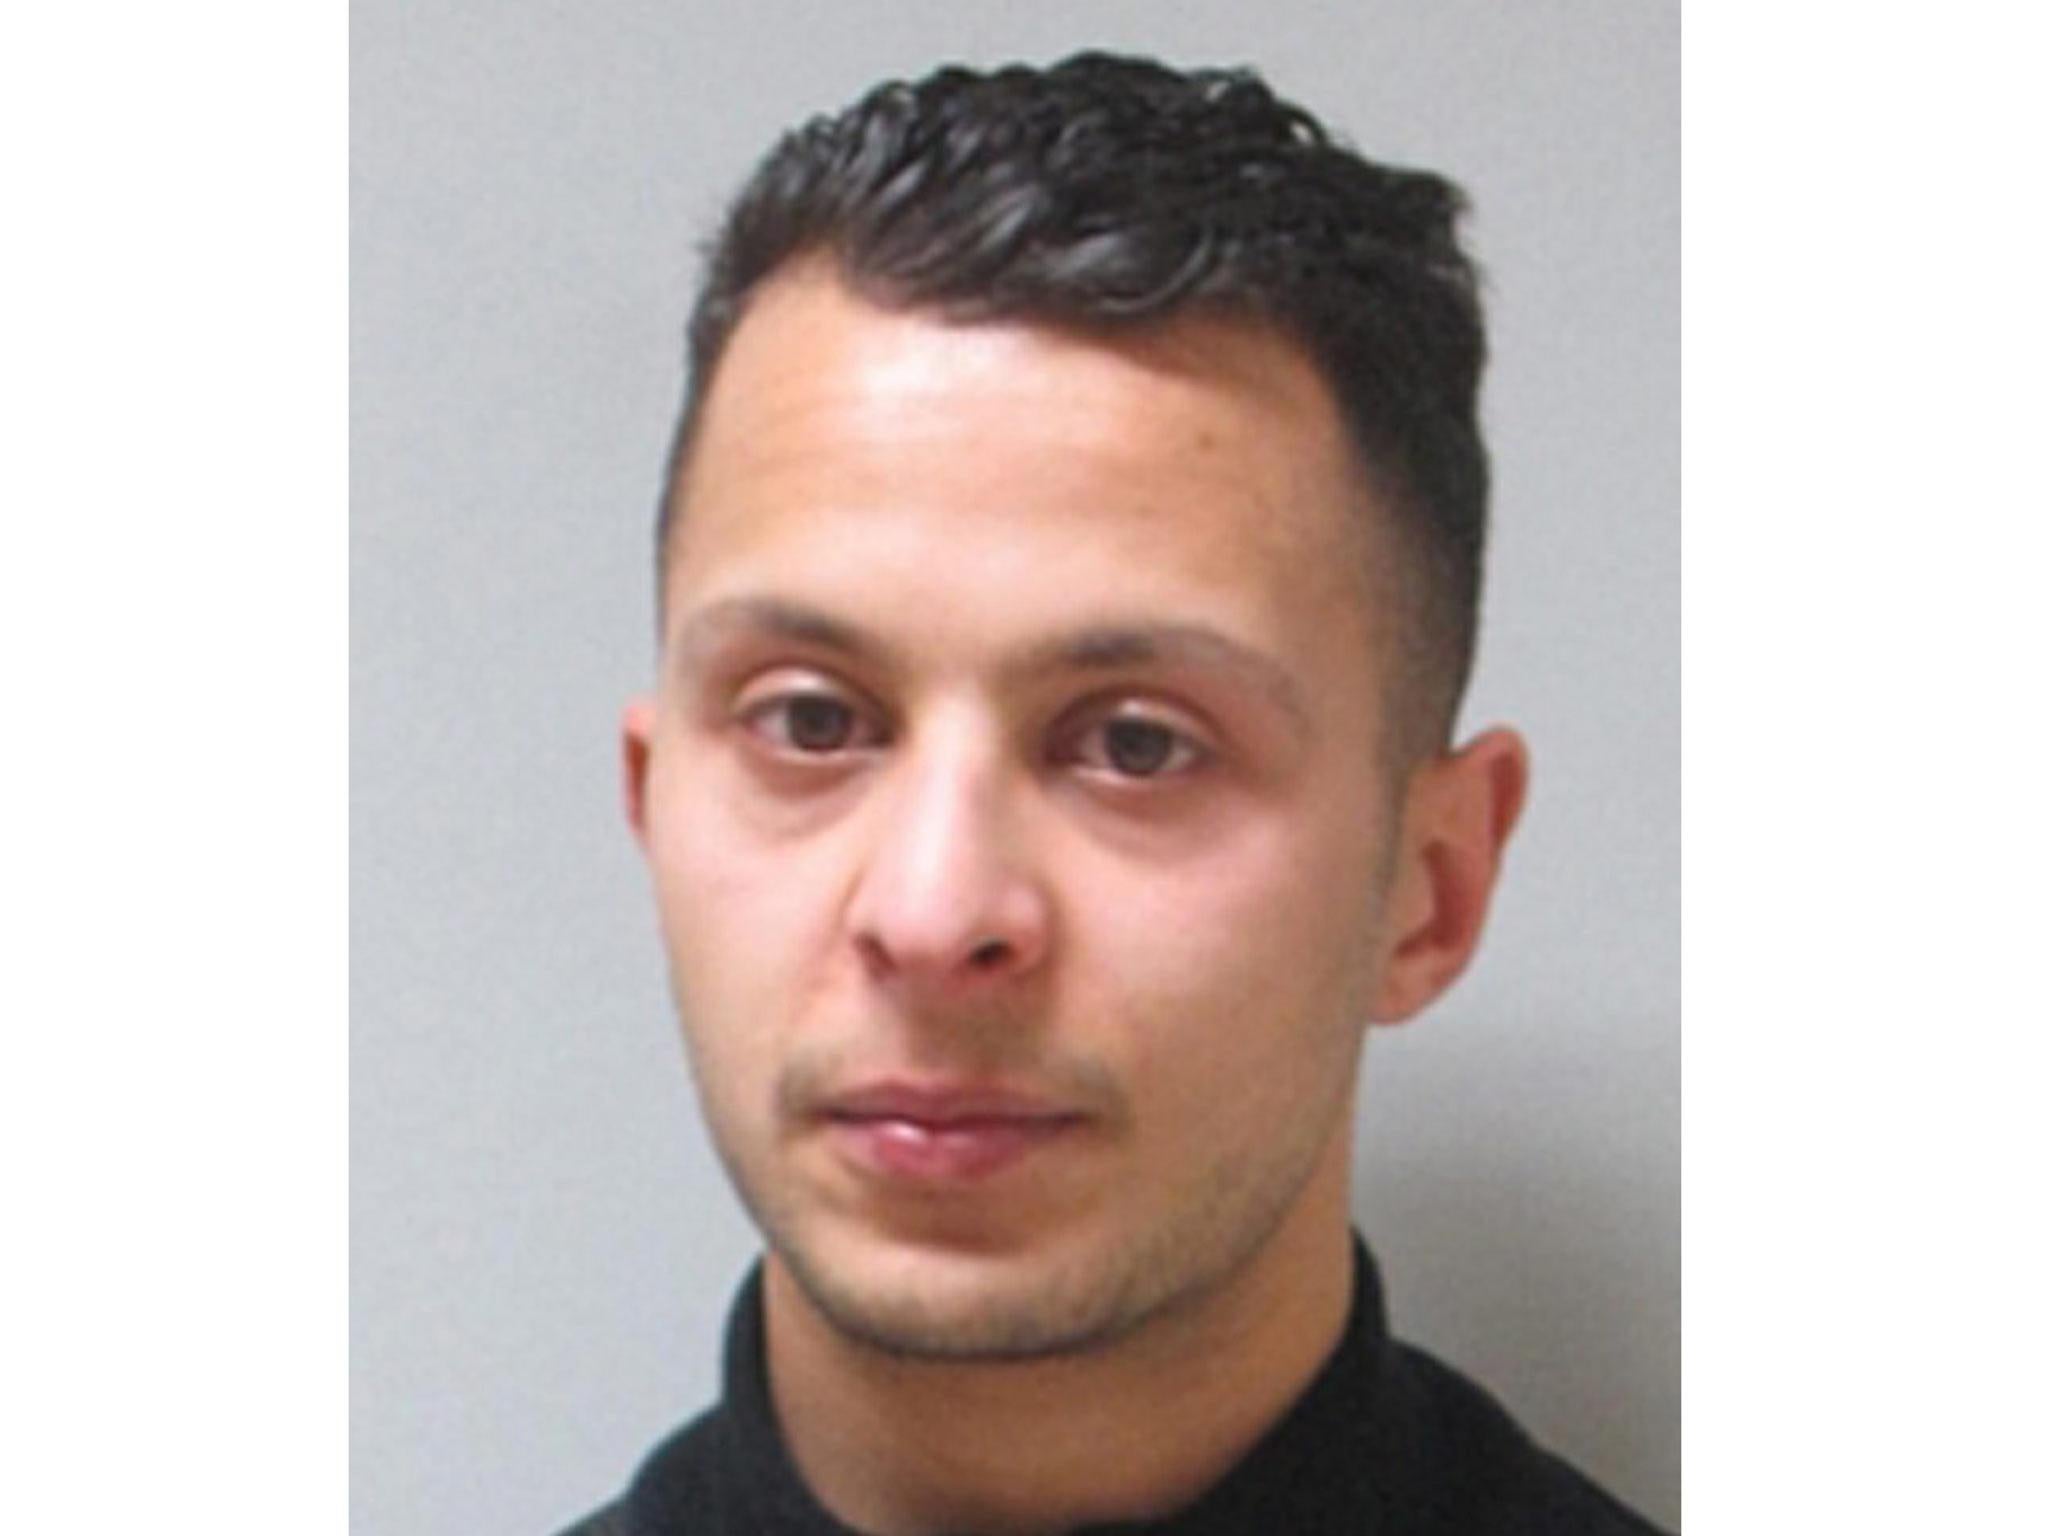 Salah Abdeslam was arrested after being shot in the leg